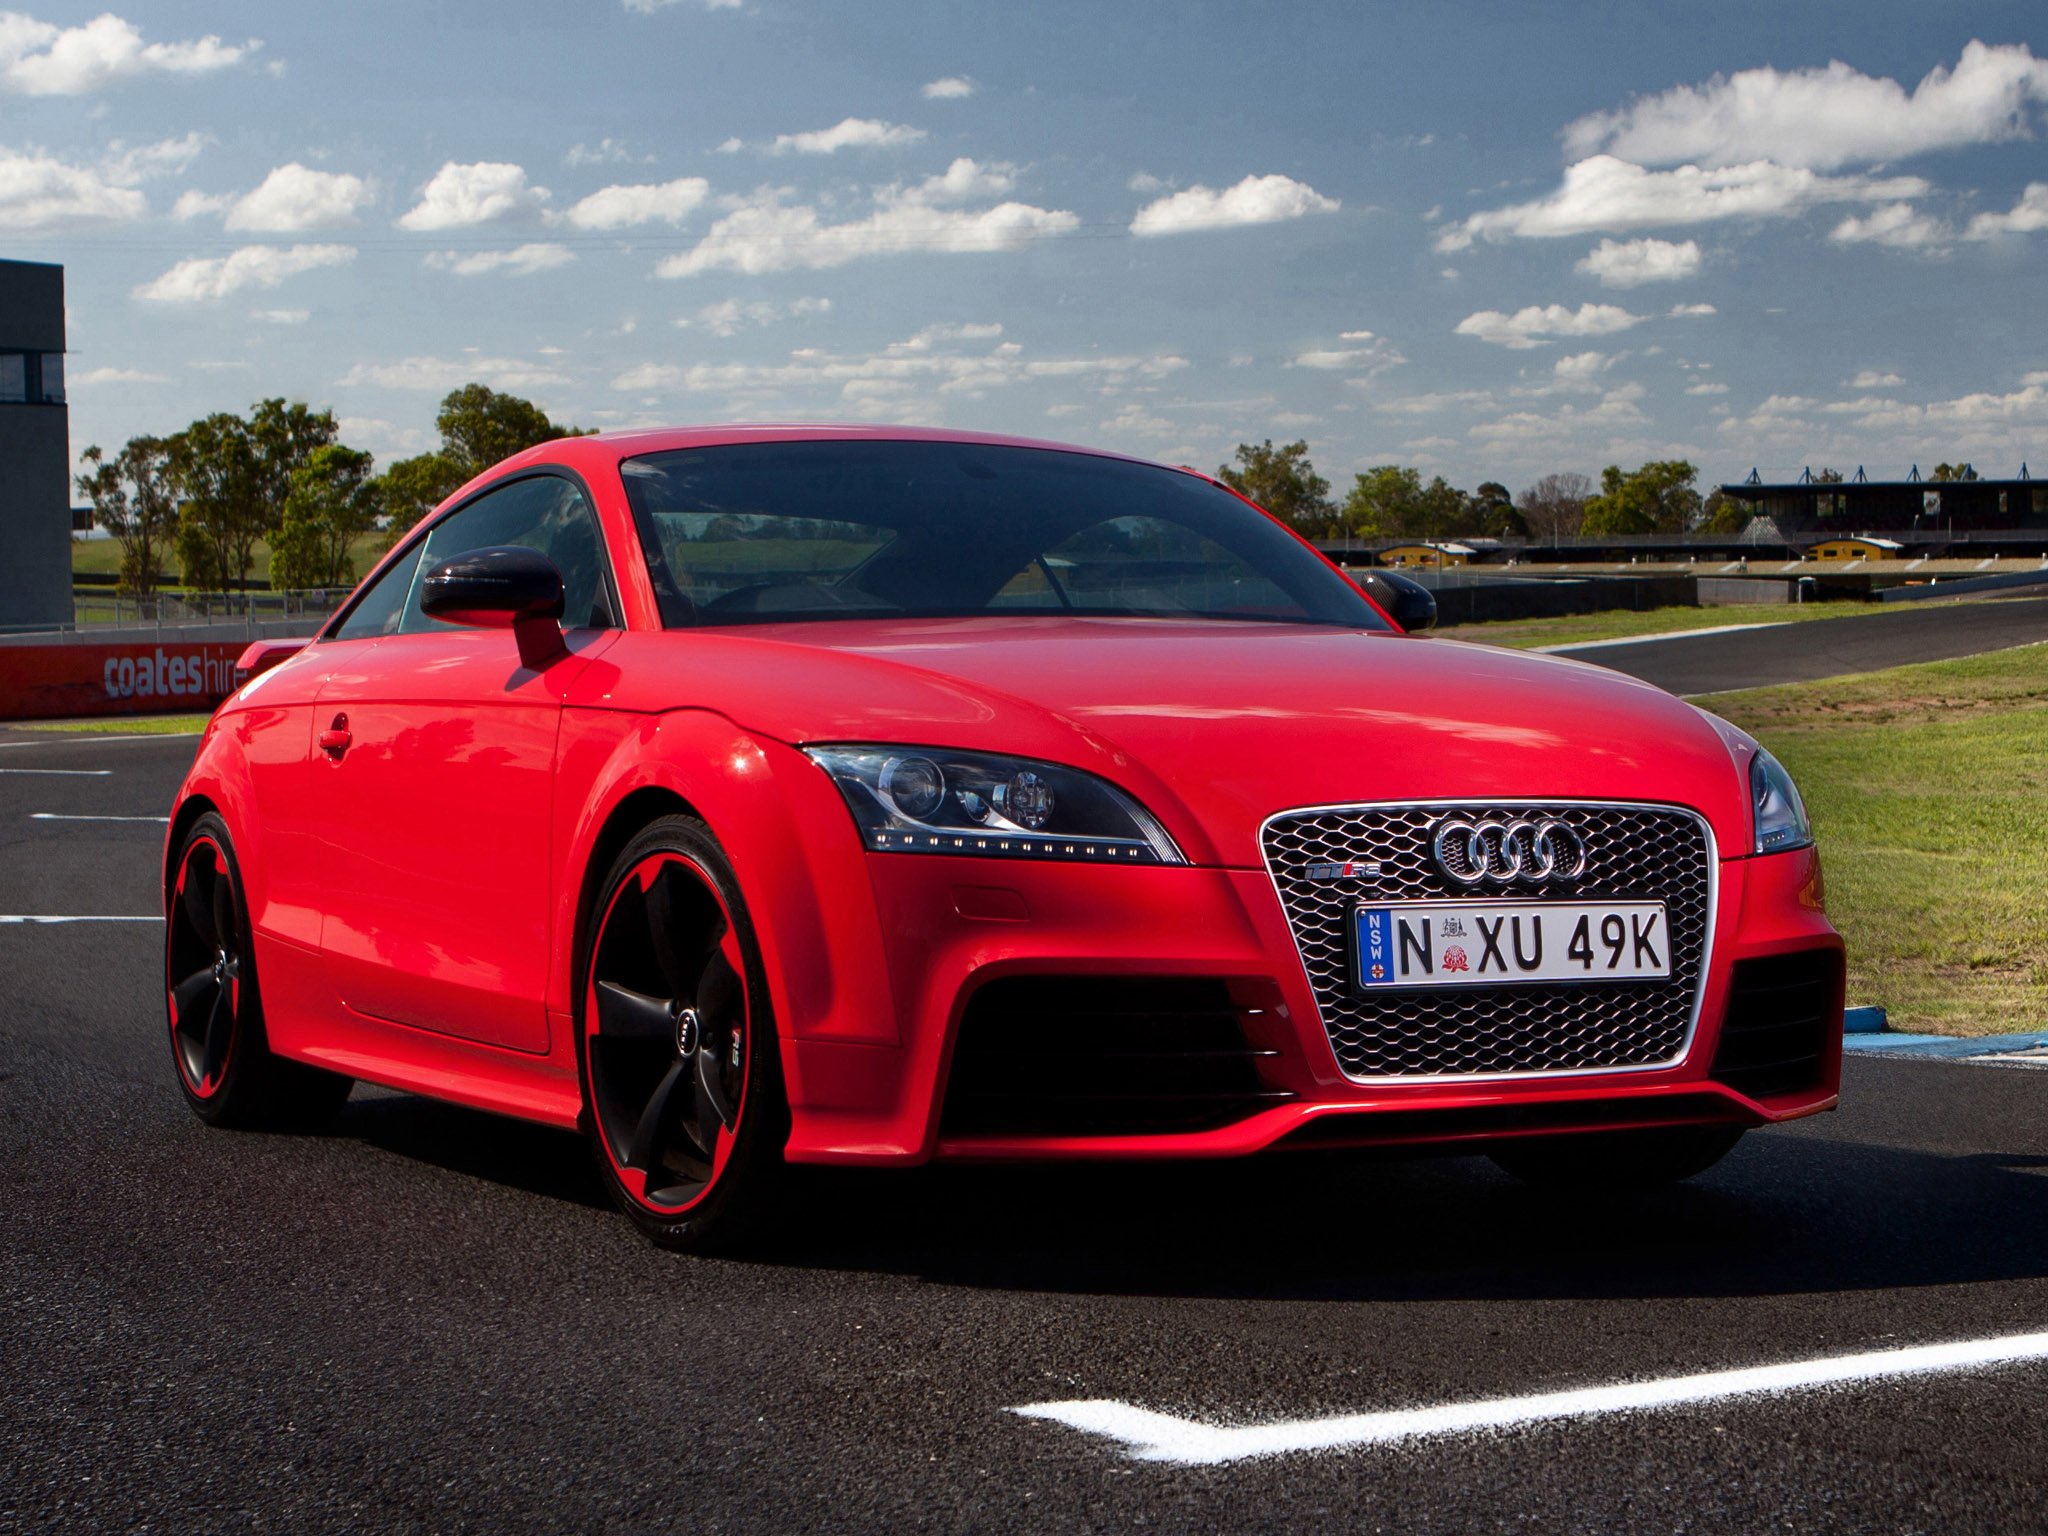 Tt sotwe. Audi TT RS. Audi TT RS 2014. Audi TT RS 2015. Audi TT RS 2006.